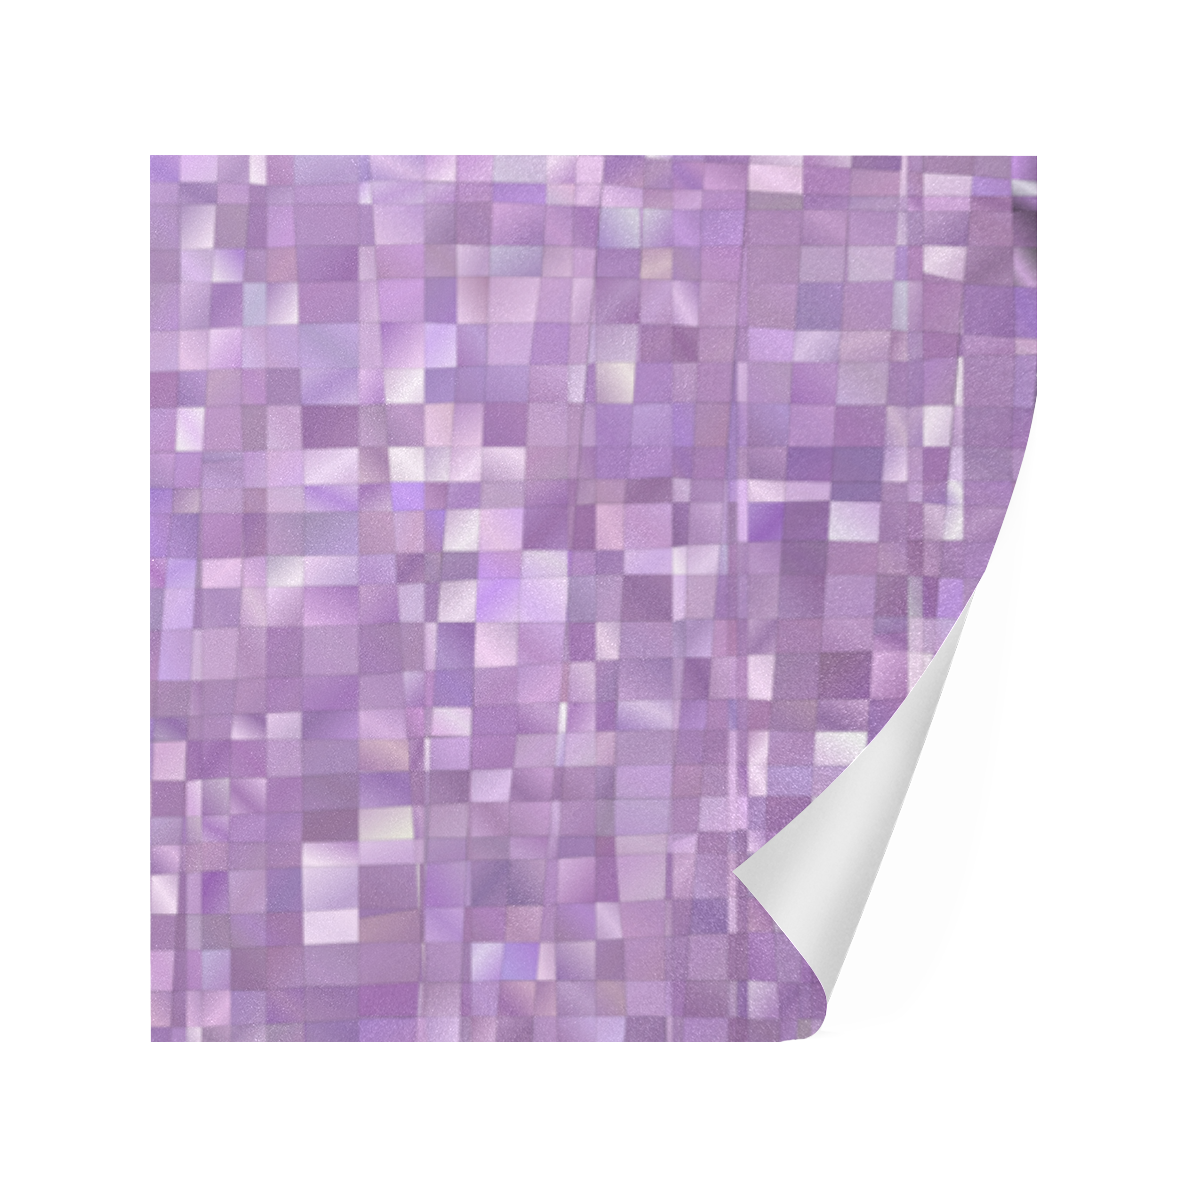 Violet, Purple Pearl Mosaic Glitch Gift Wrapping Paper 58"x 23" (1 Roll)